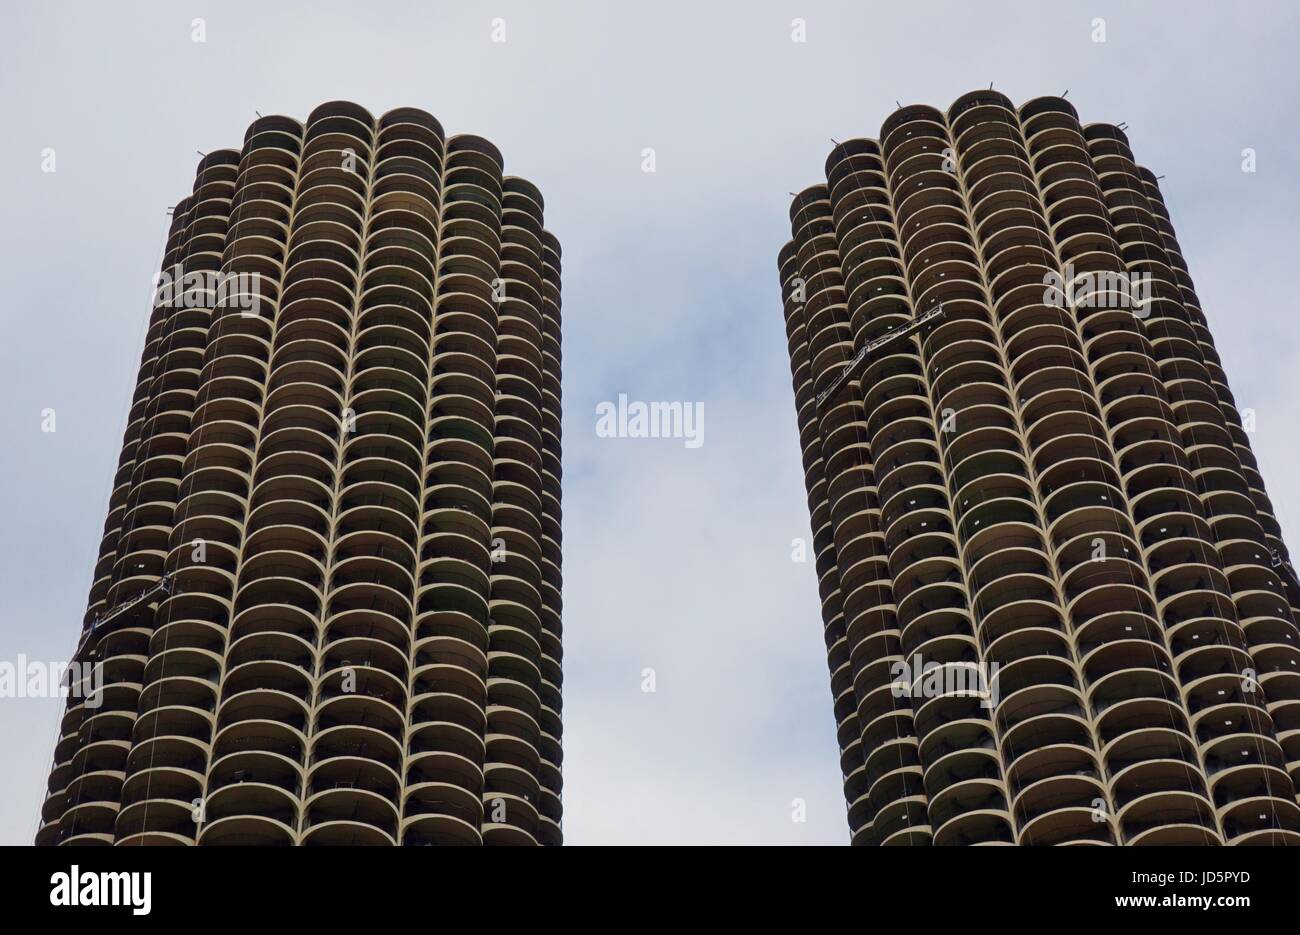 View of the landmark twin towers Marina City building complex on the Chicago River in downtown Chicago. Stock Photo